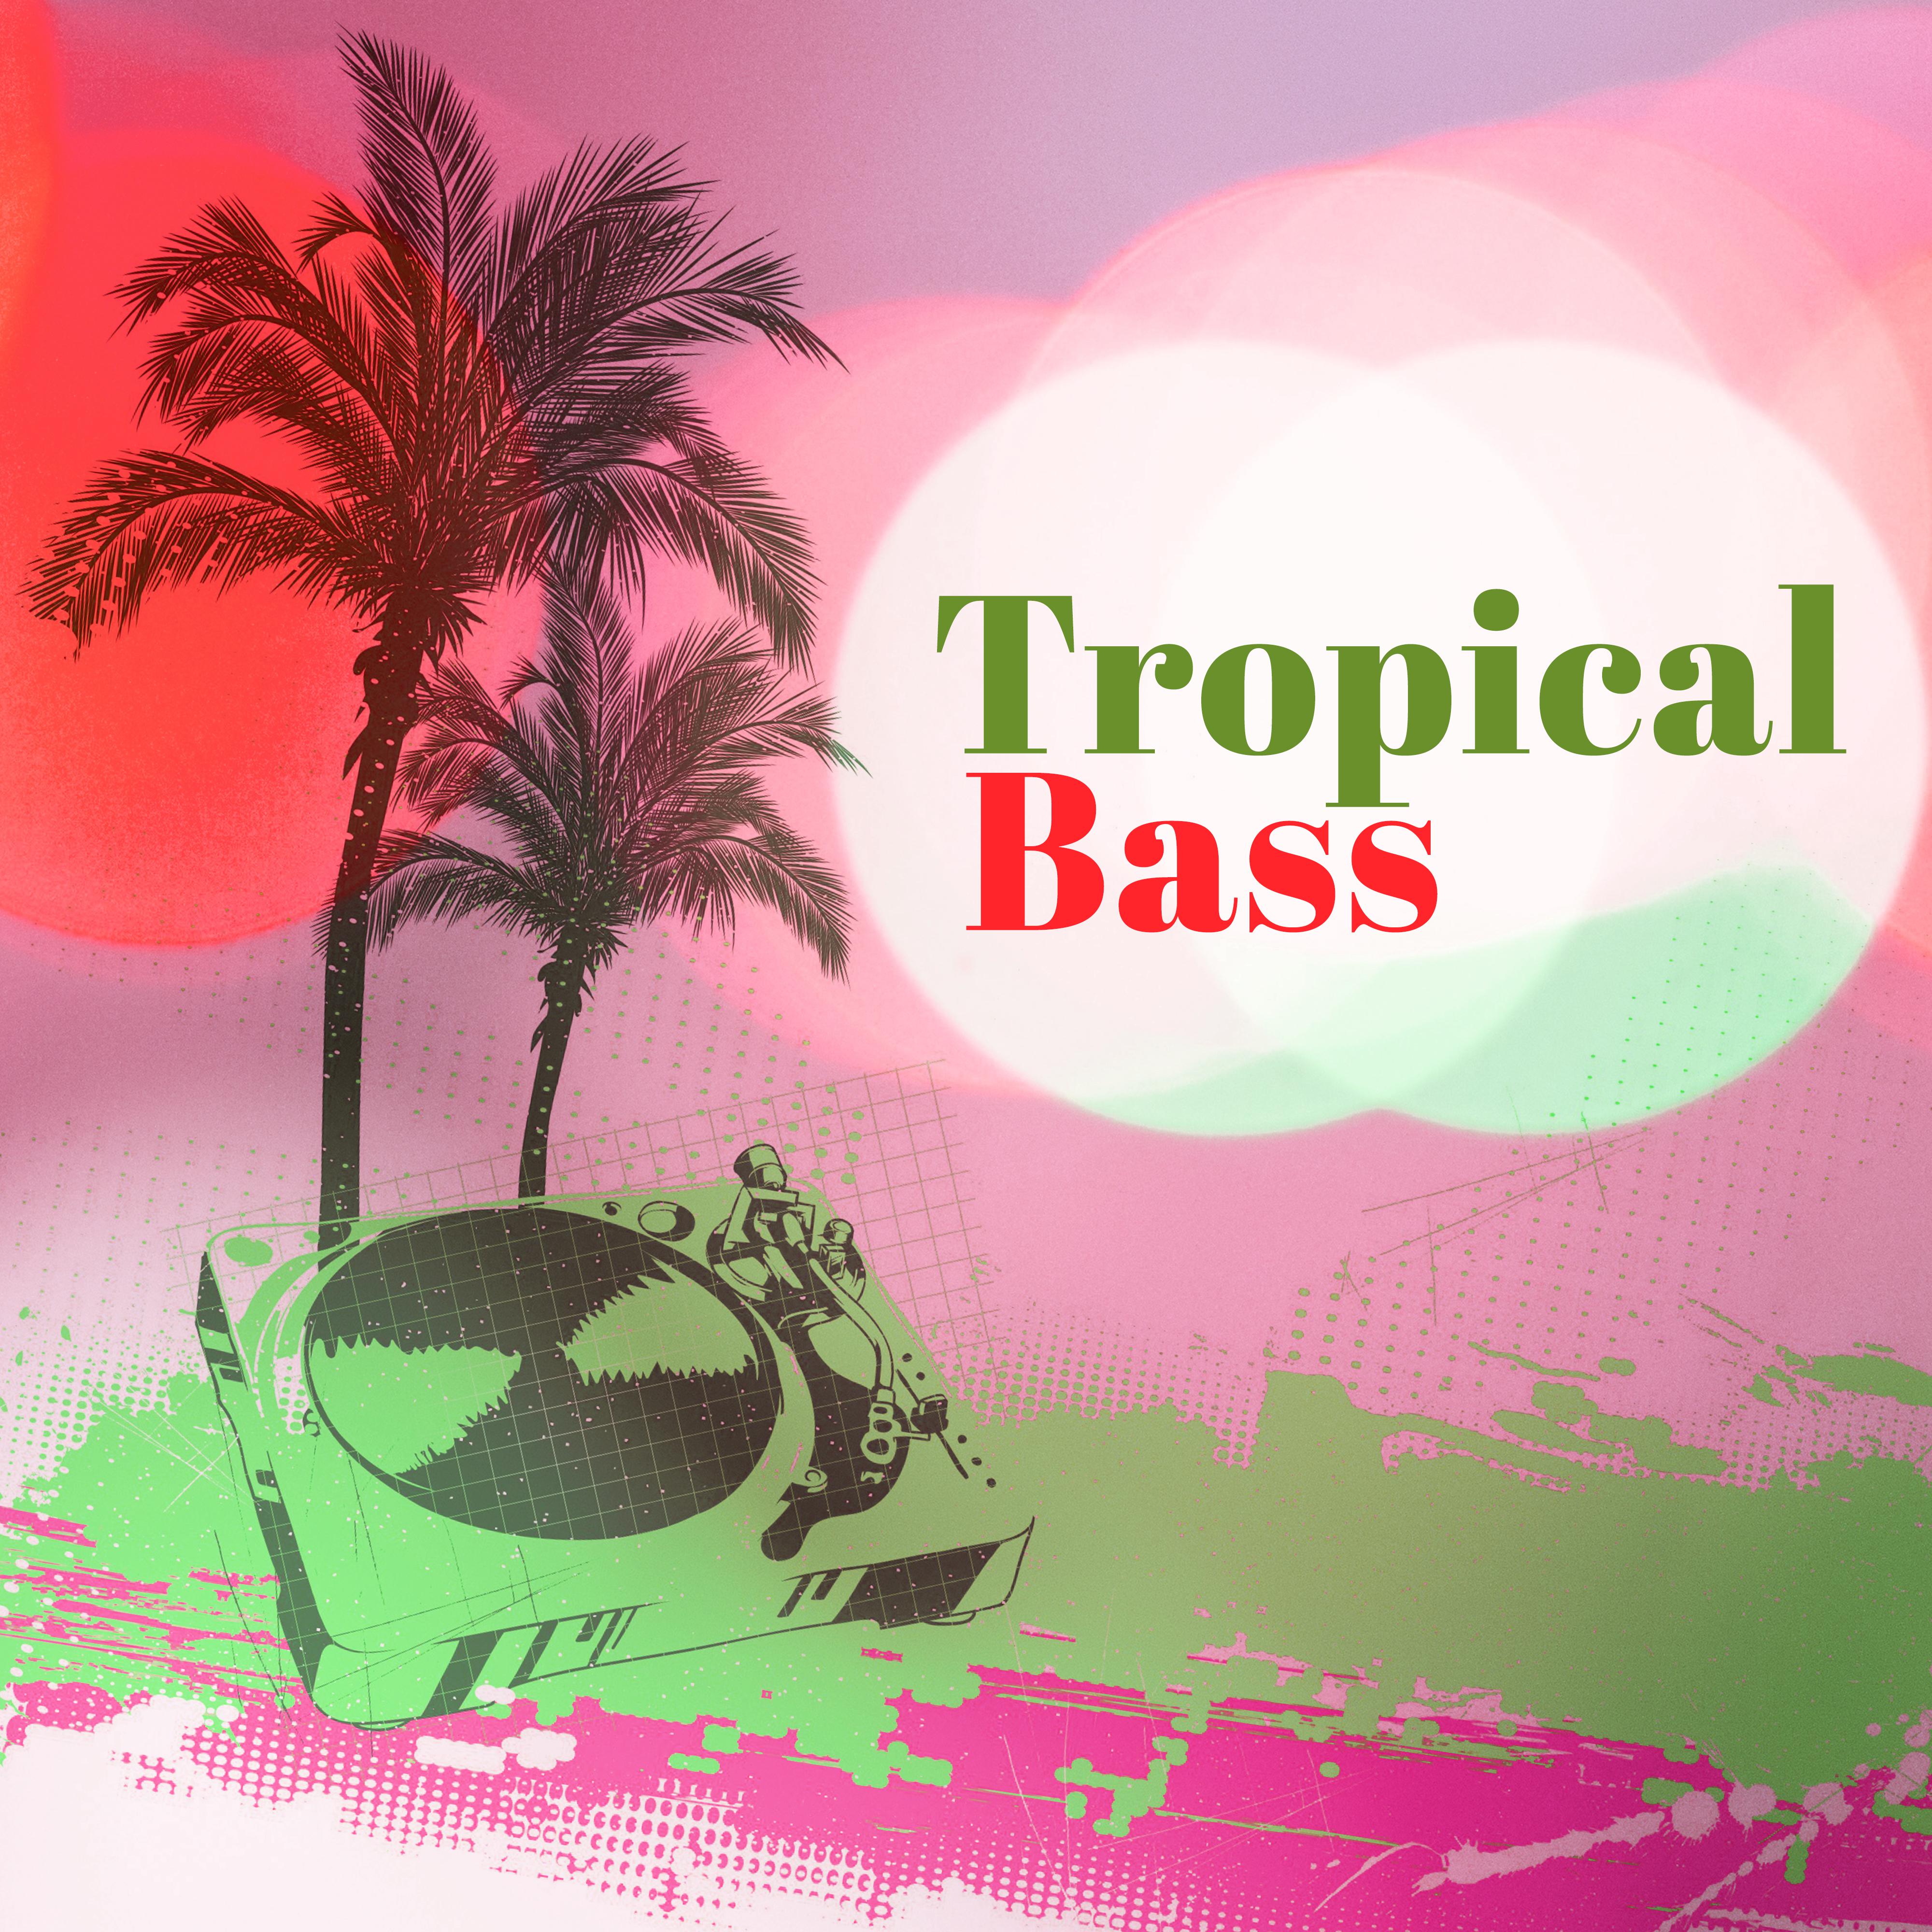 Tropical Bass  Beach Party, Ibiza Chill Out, Holiday Music, Zen Sounds, Summer Chill Out